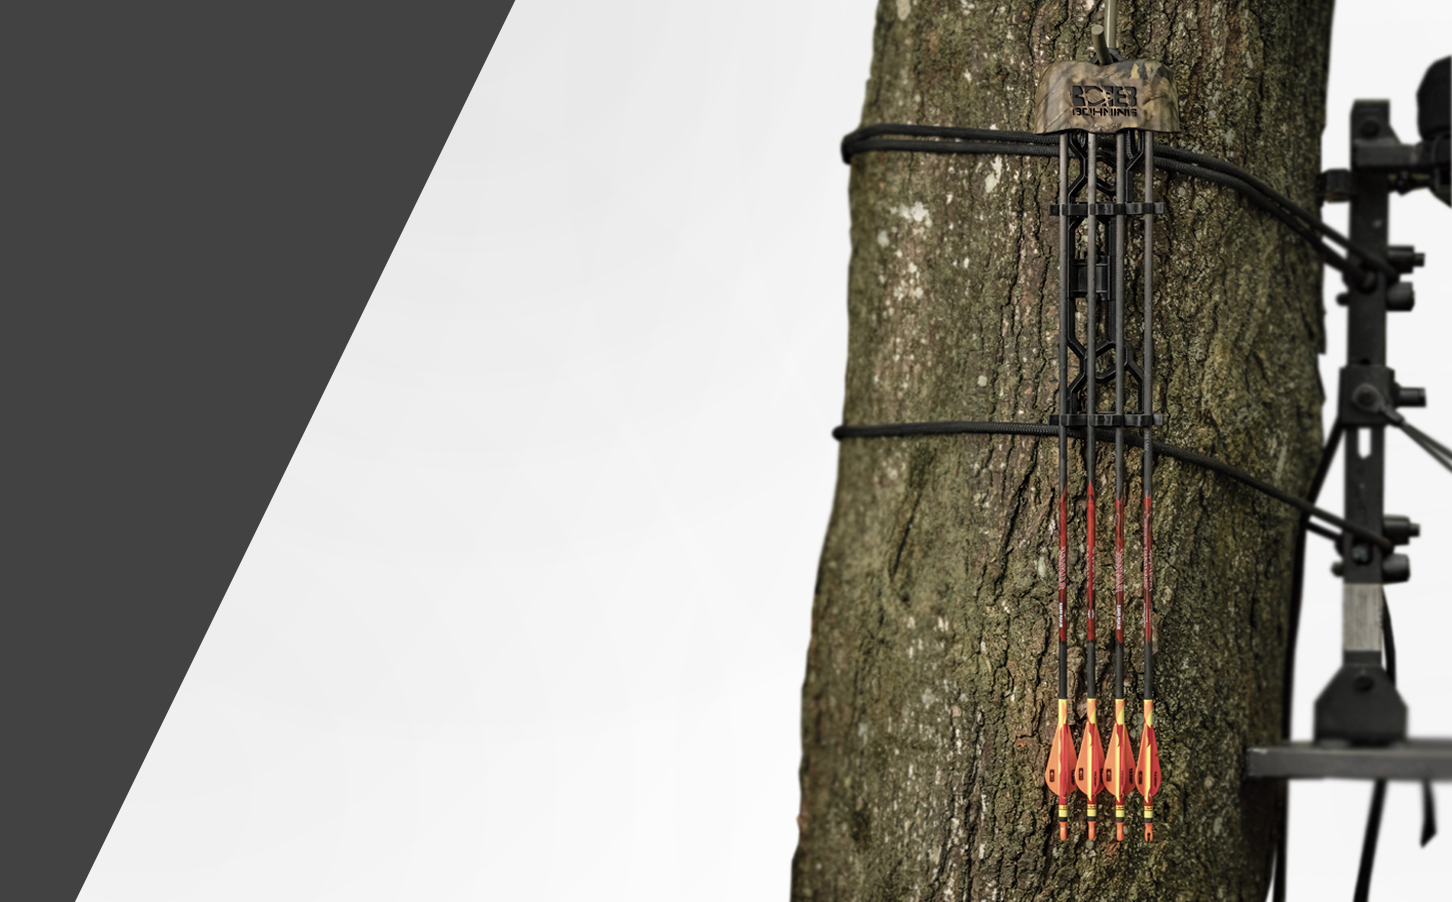 best compound hunting quiver